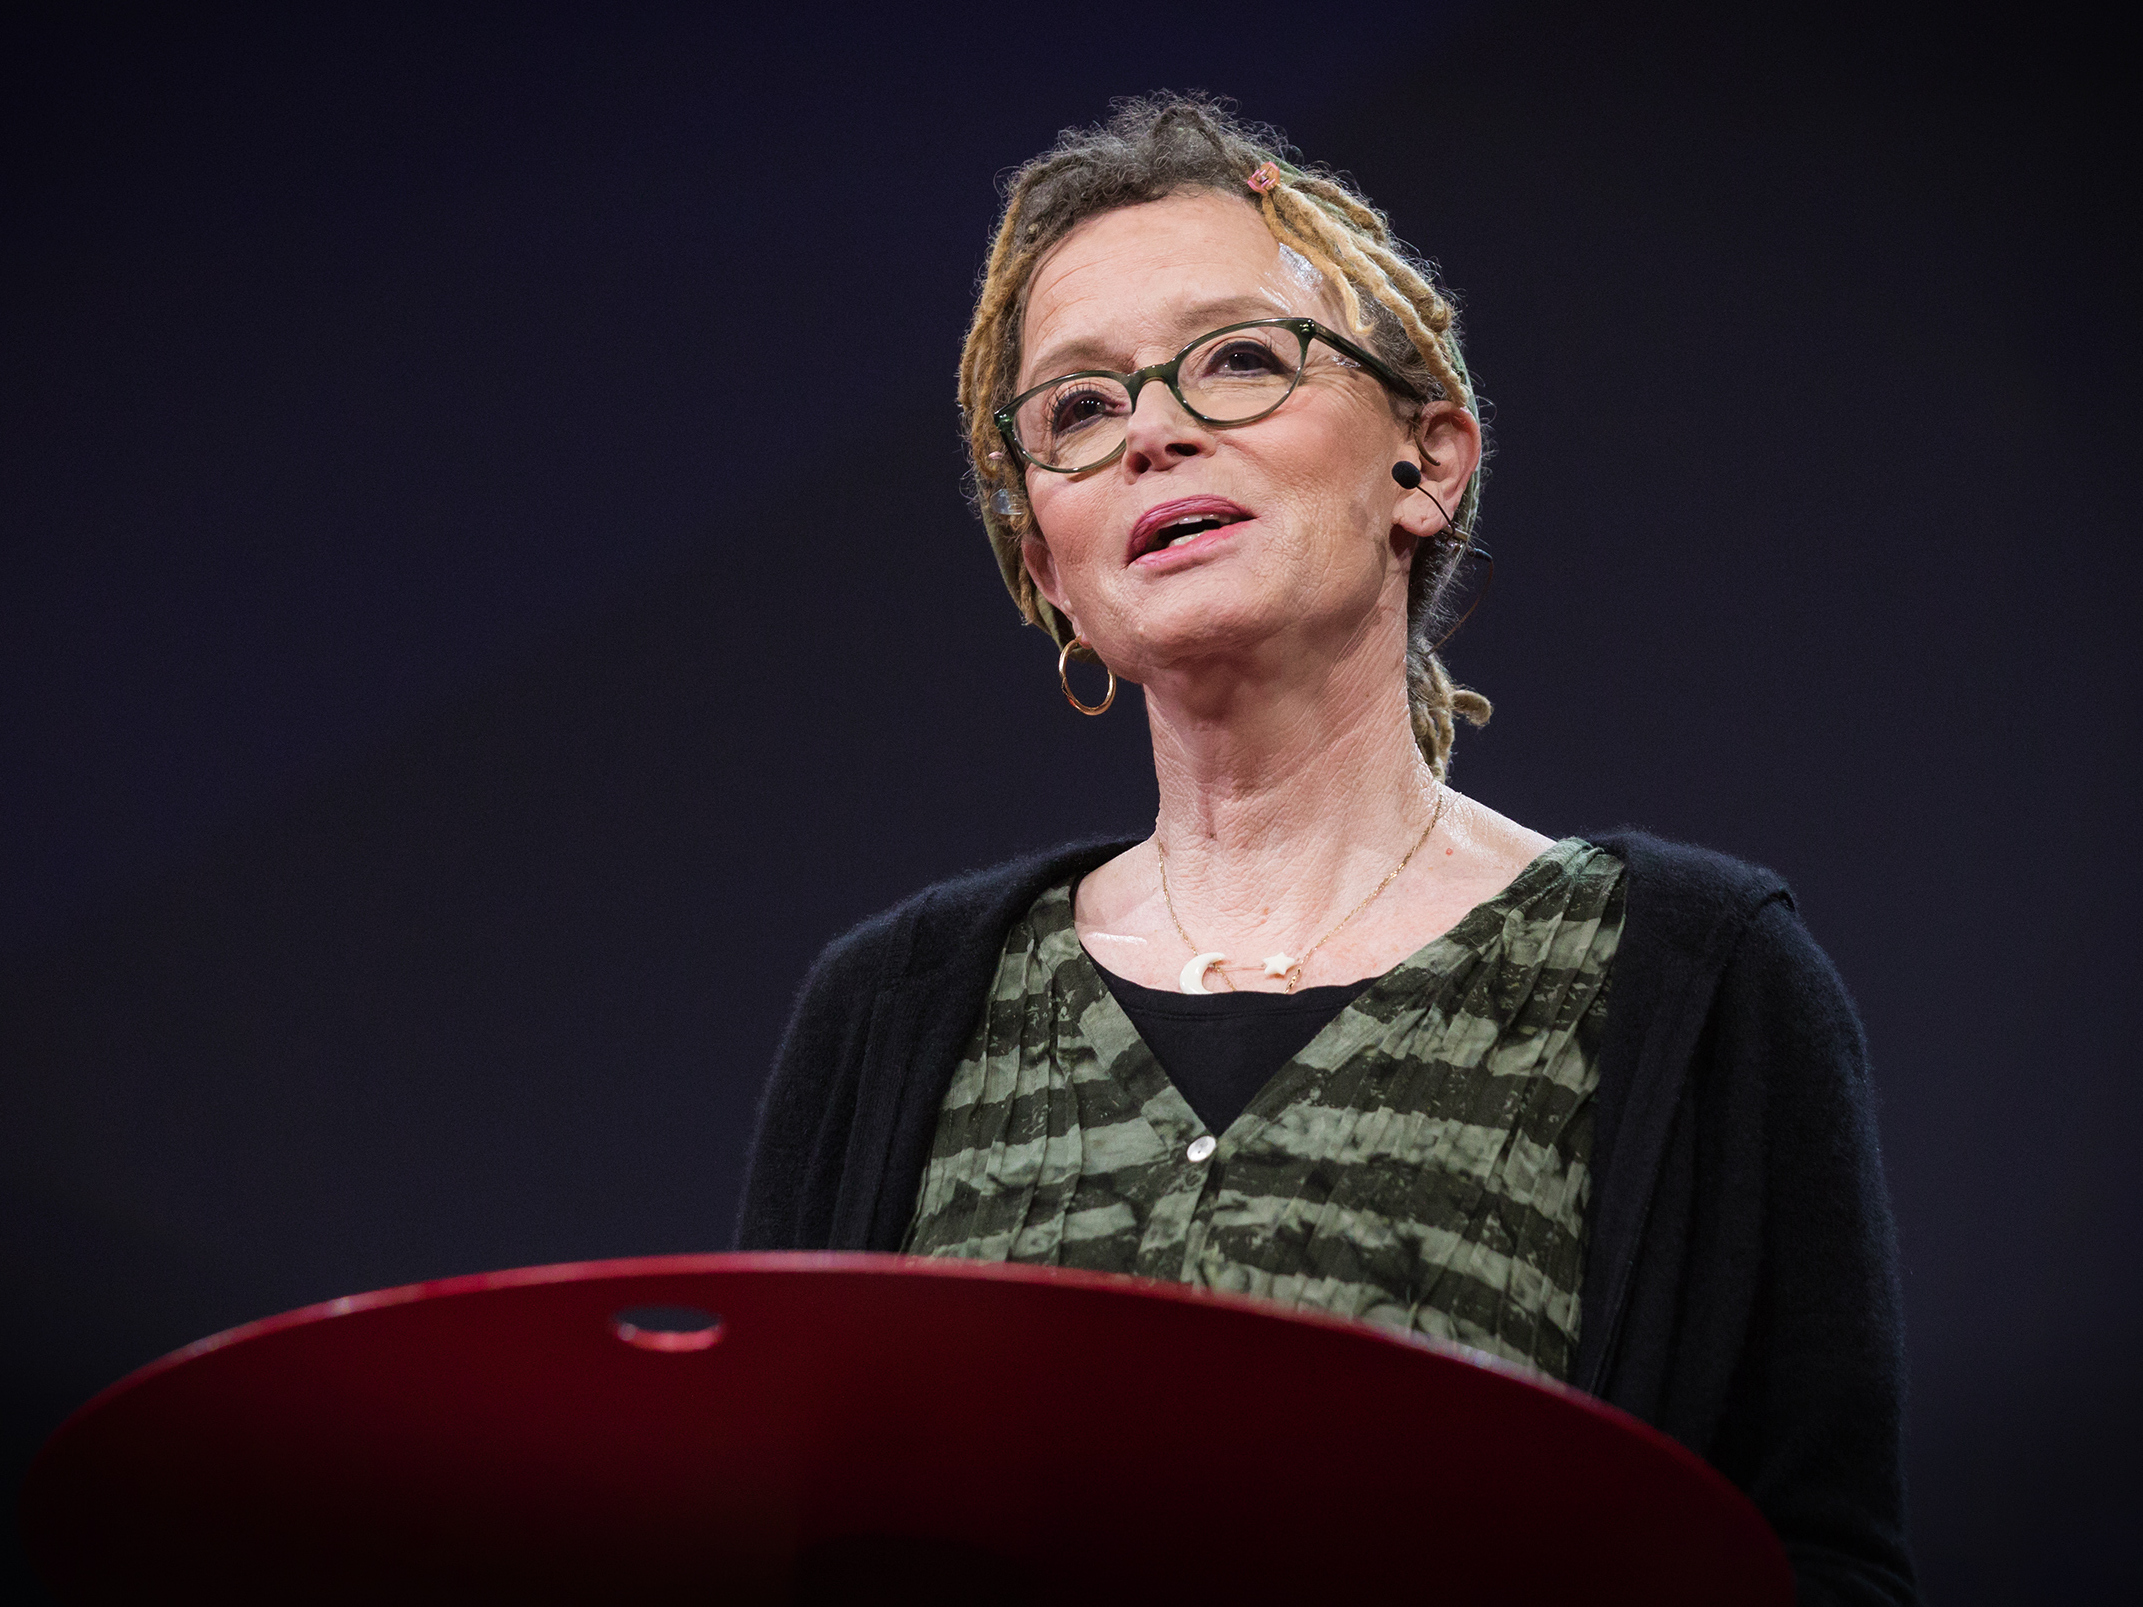 Anne Lamott reflects on life, death, and ‘learning to endure the beams of love’